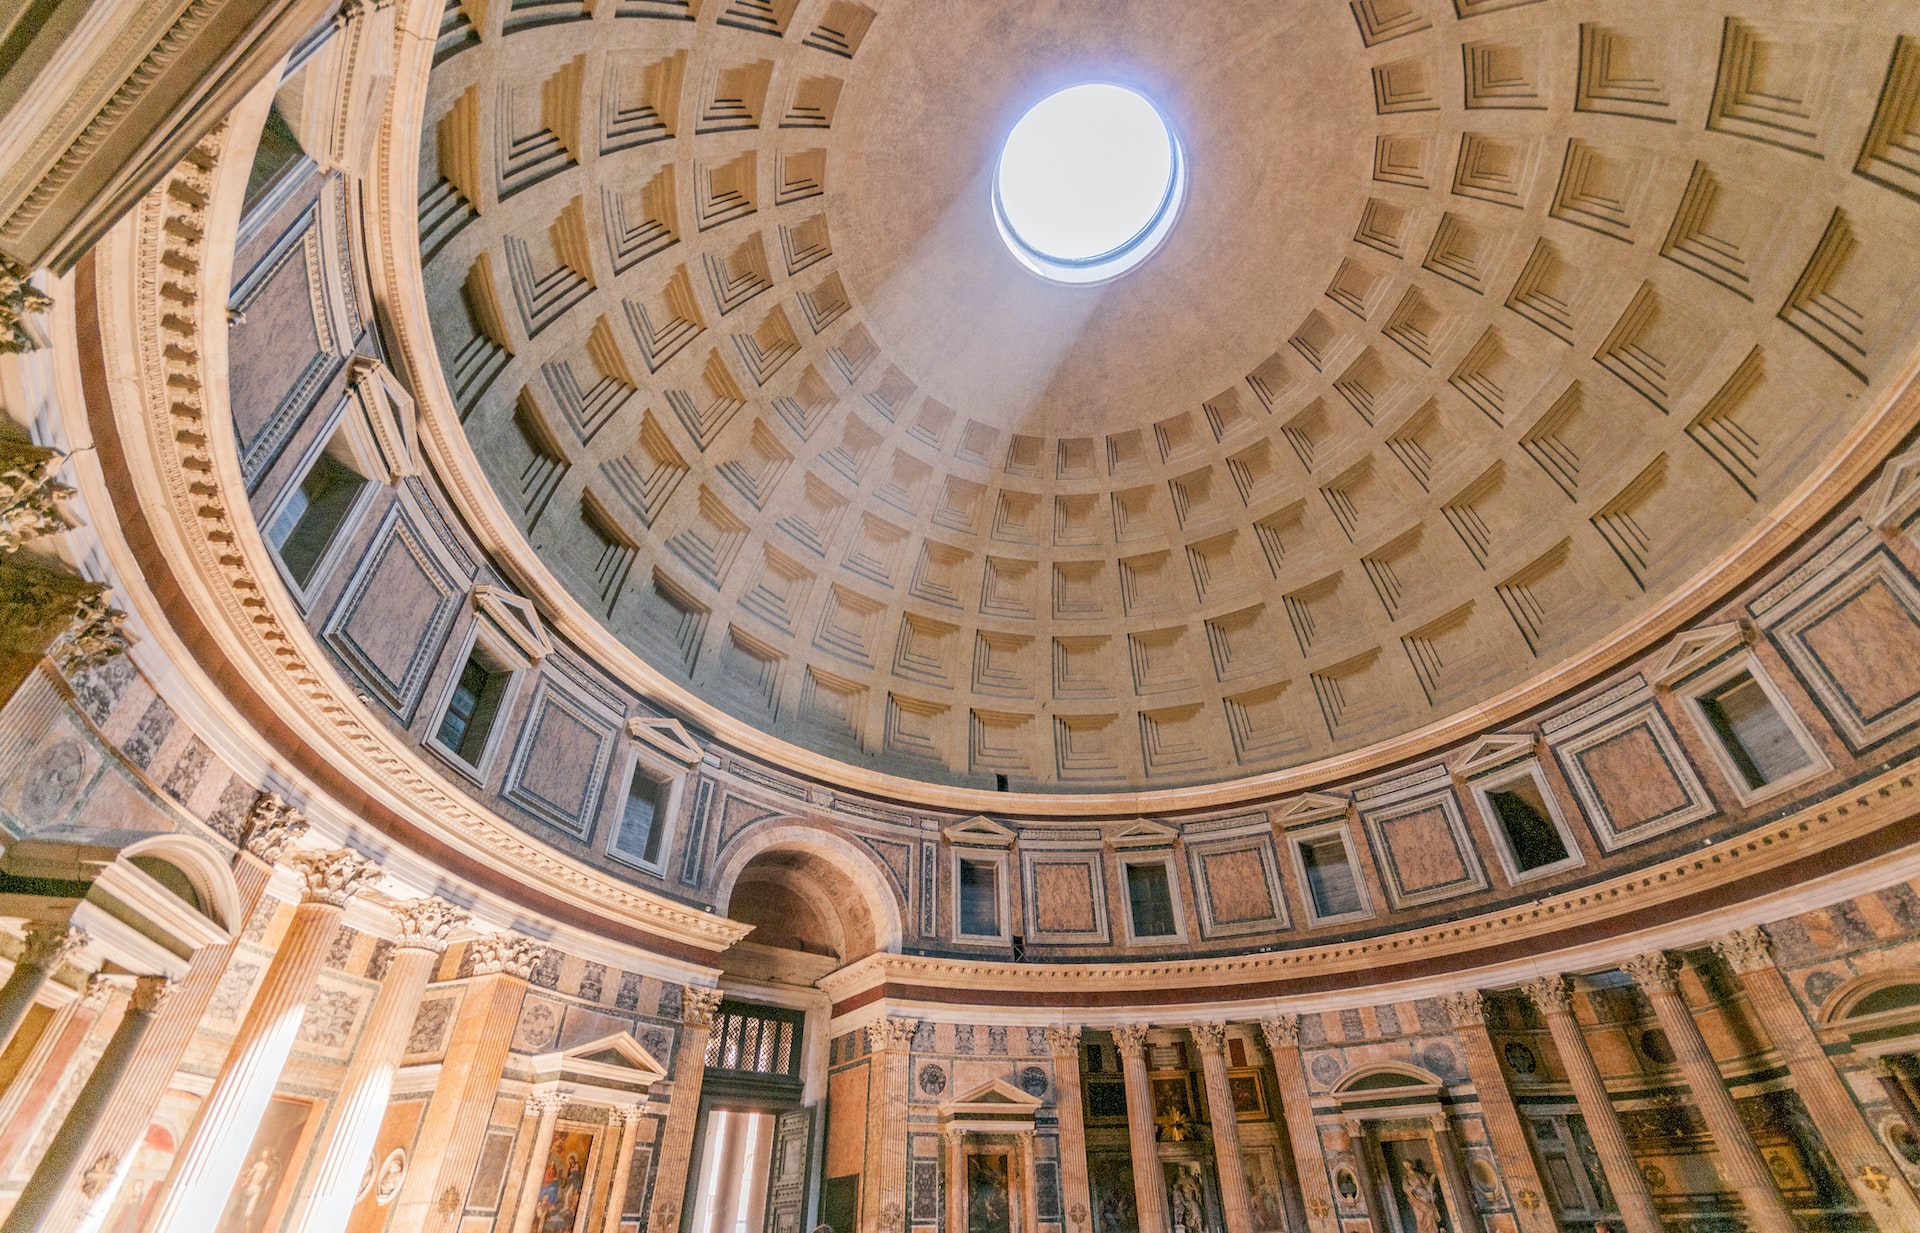 Interior photo of Rome's Pantheon shows the detail of the dome and its surrounding features.